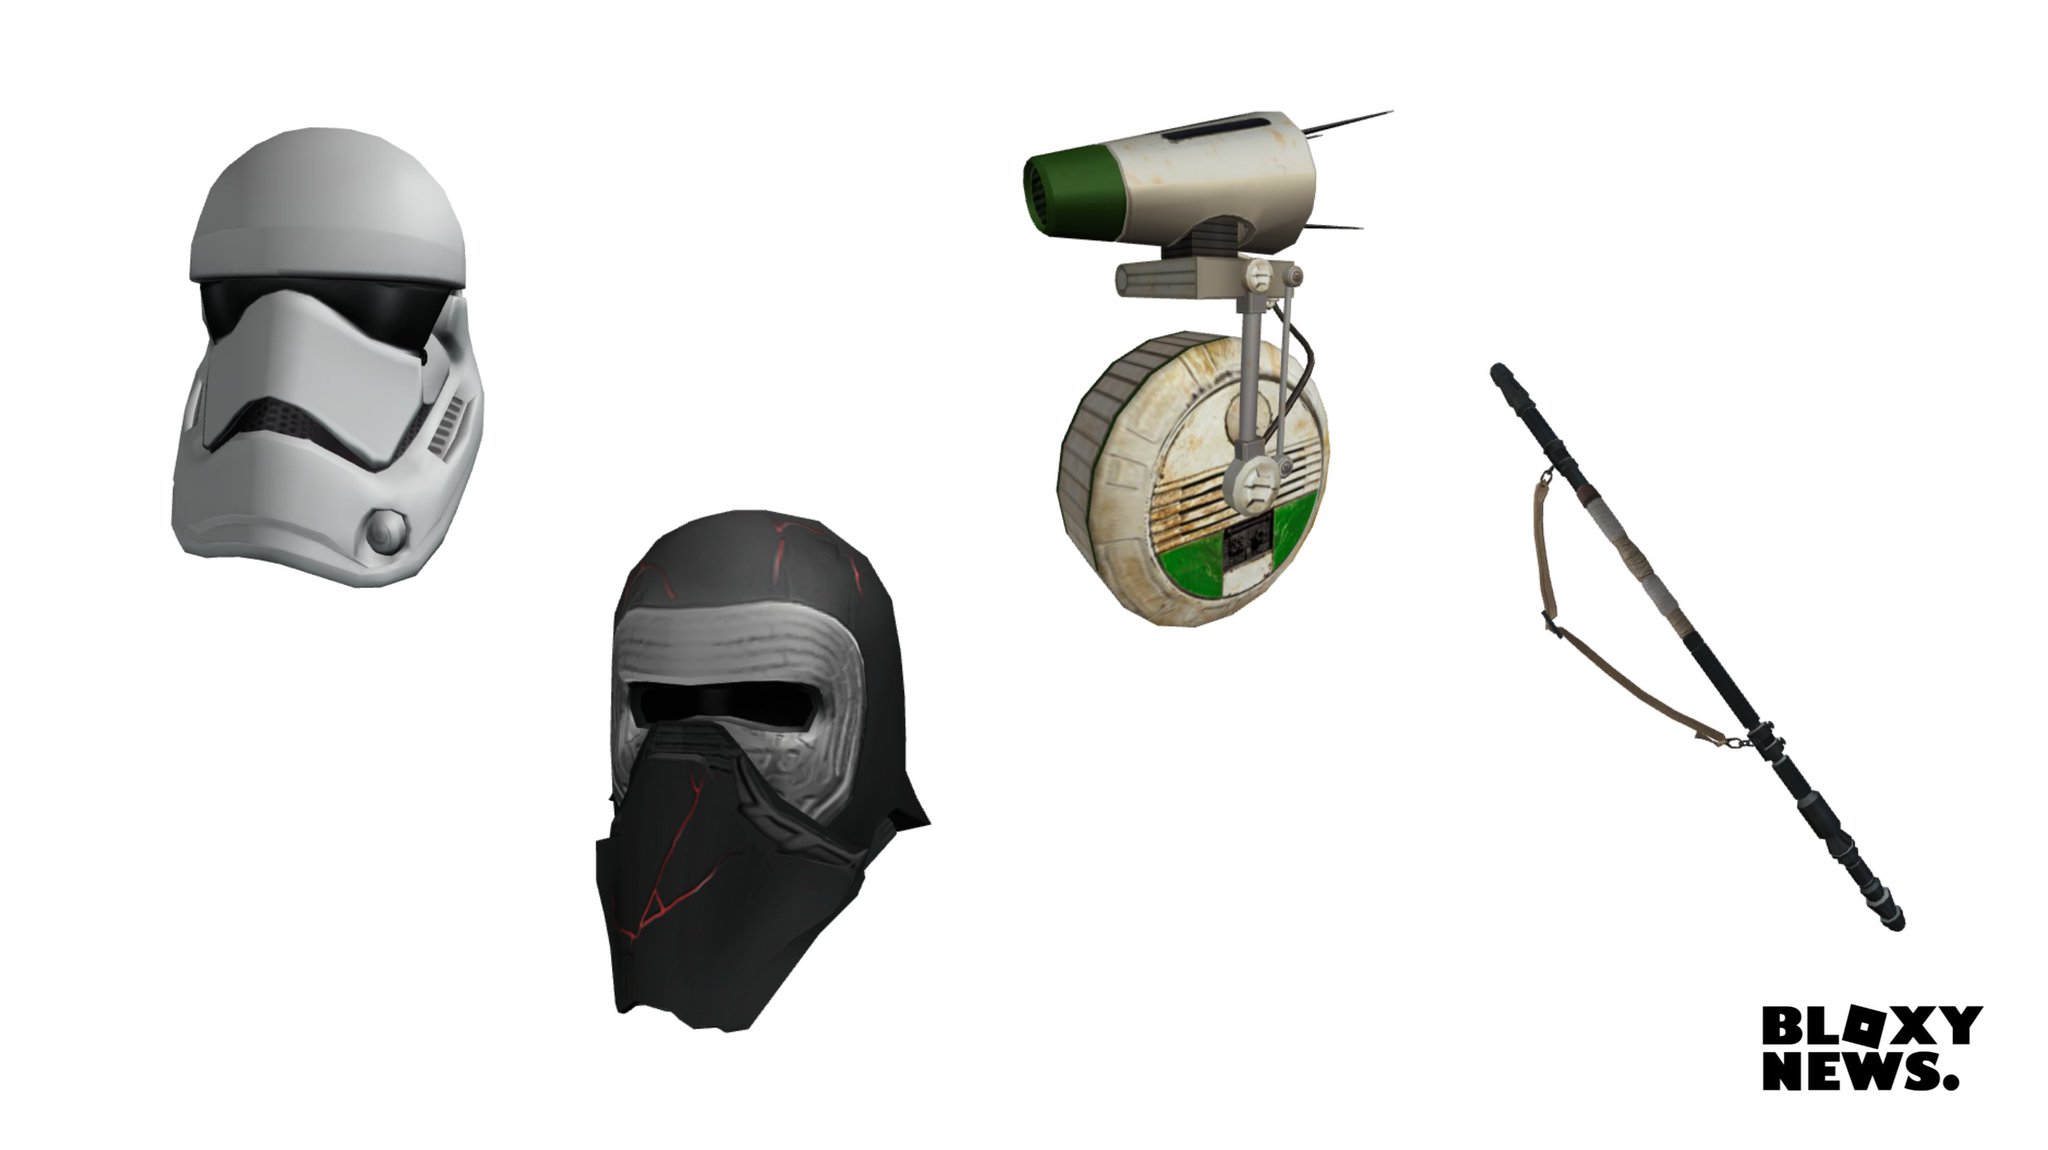 Bloxy News Ar Twitter Turns Out These Star Wars Items Will Be Part Of The Next Roblox Creator Challenge Sponsored By Star Wars Theriseofskywalker Here Is The Game Link Along With - star wars creator challenge roblox